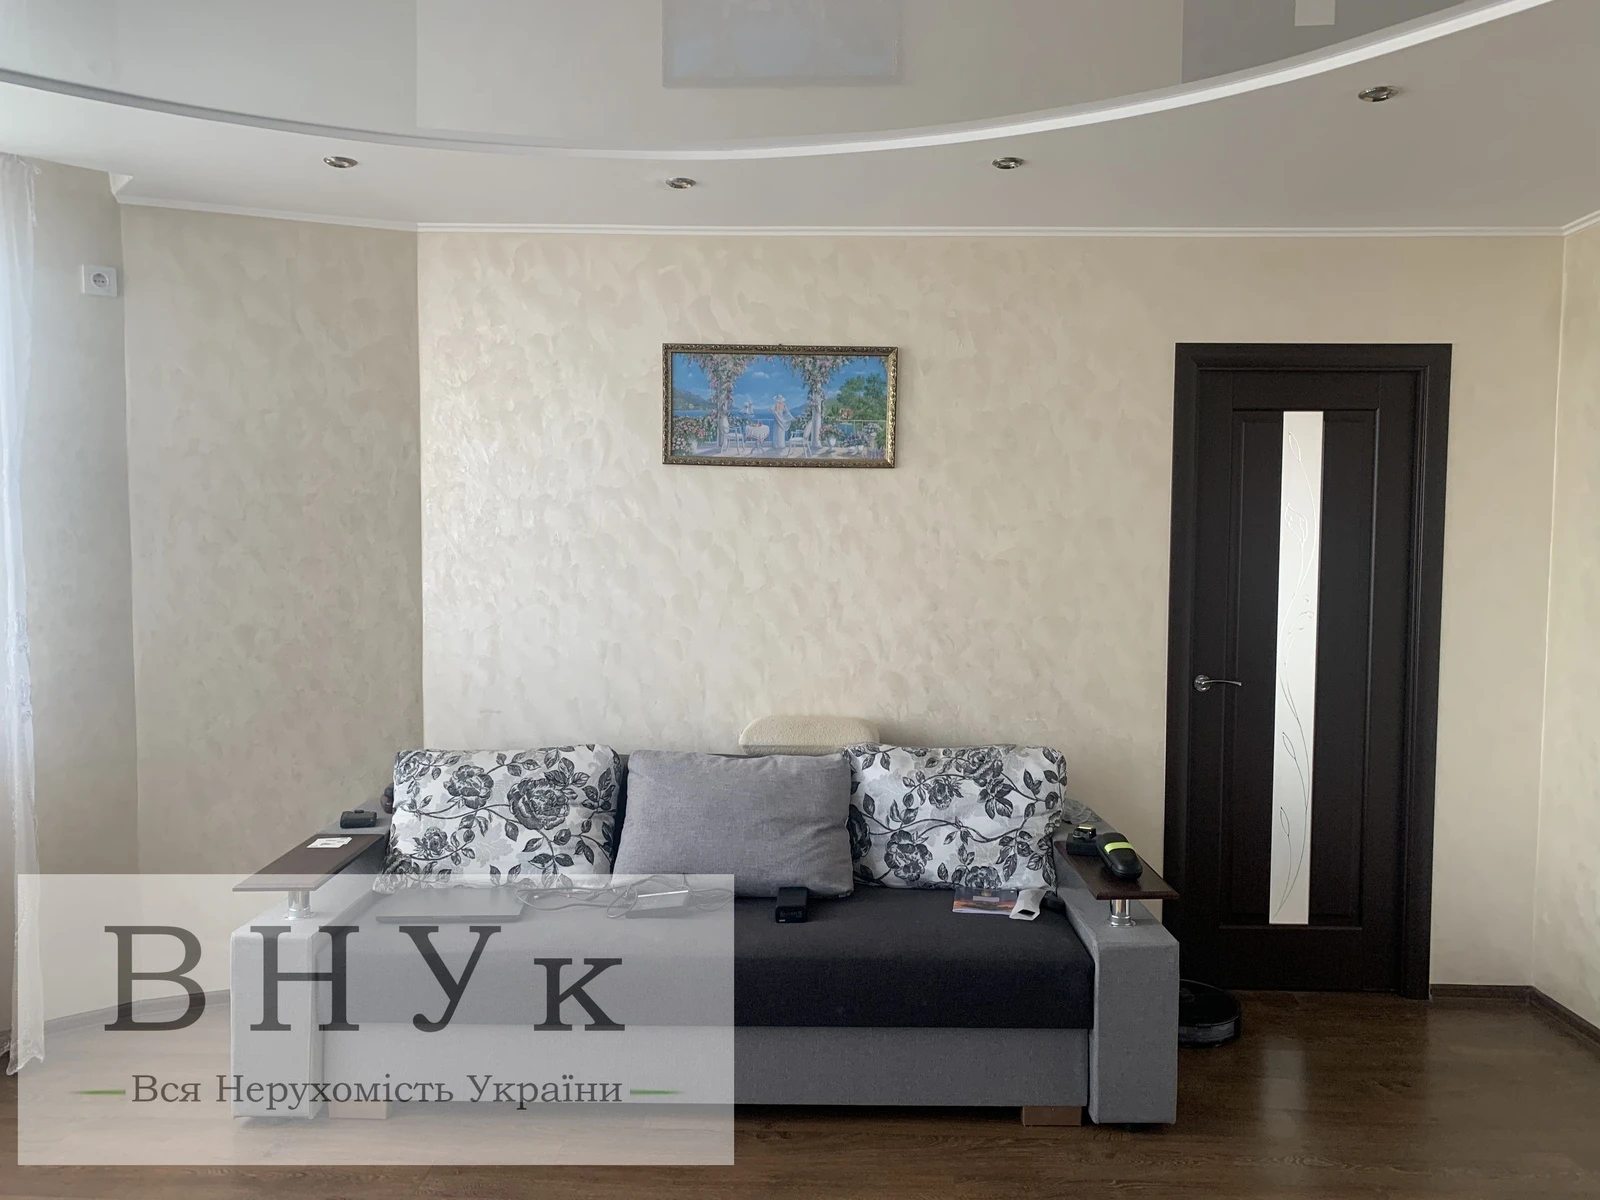 Apartments for sale. 3 rooms, 98 m², 8th floor/11 floors. Troleybusna vul., Ternopil. 